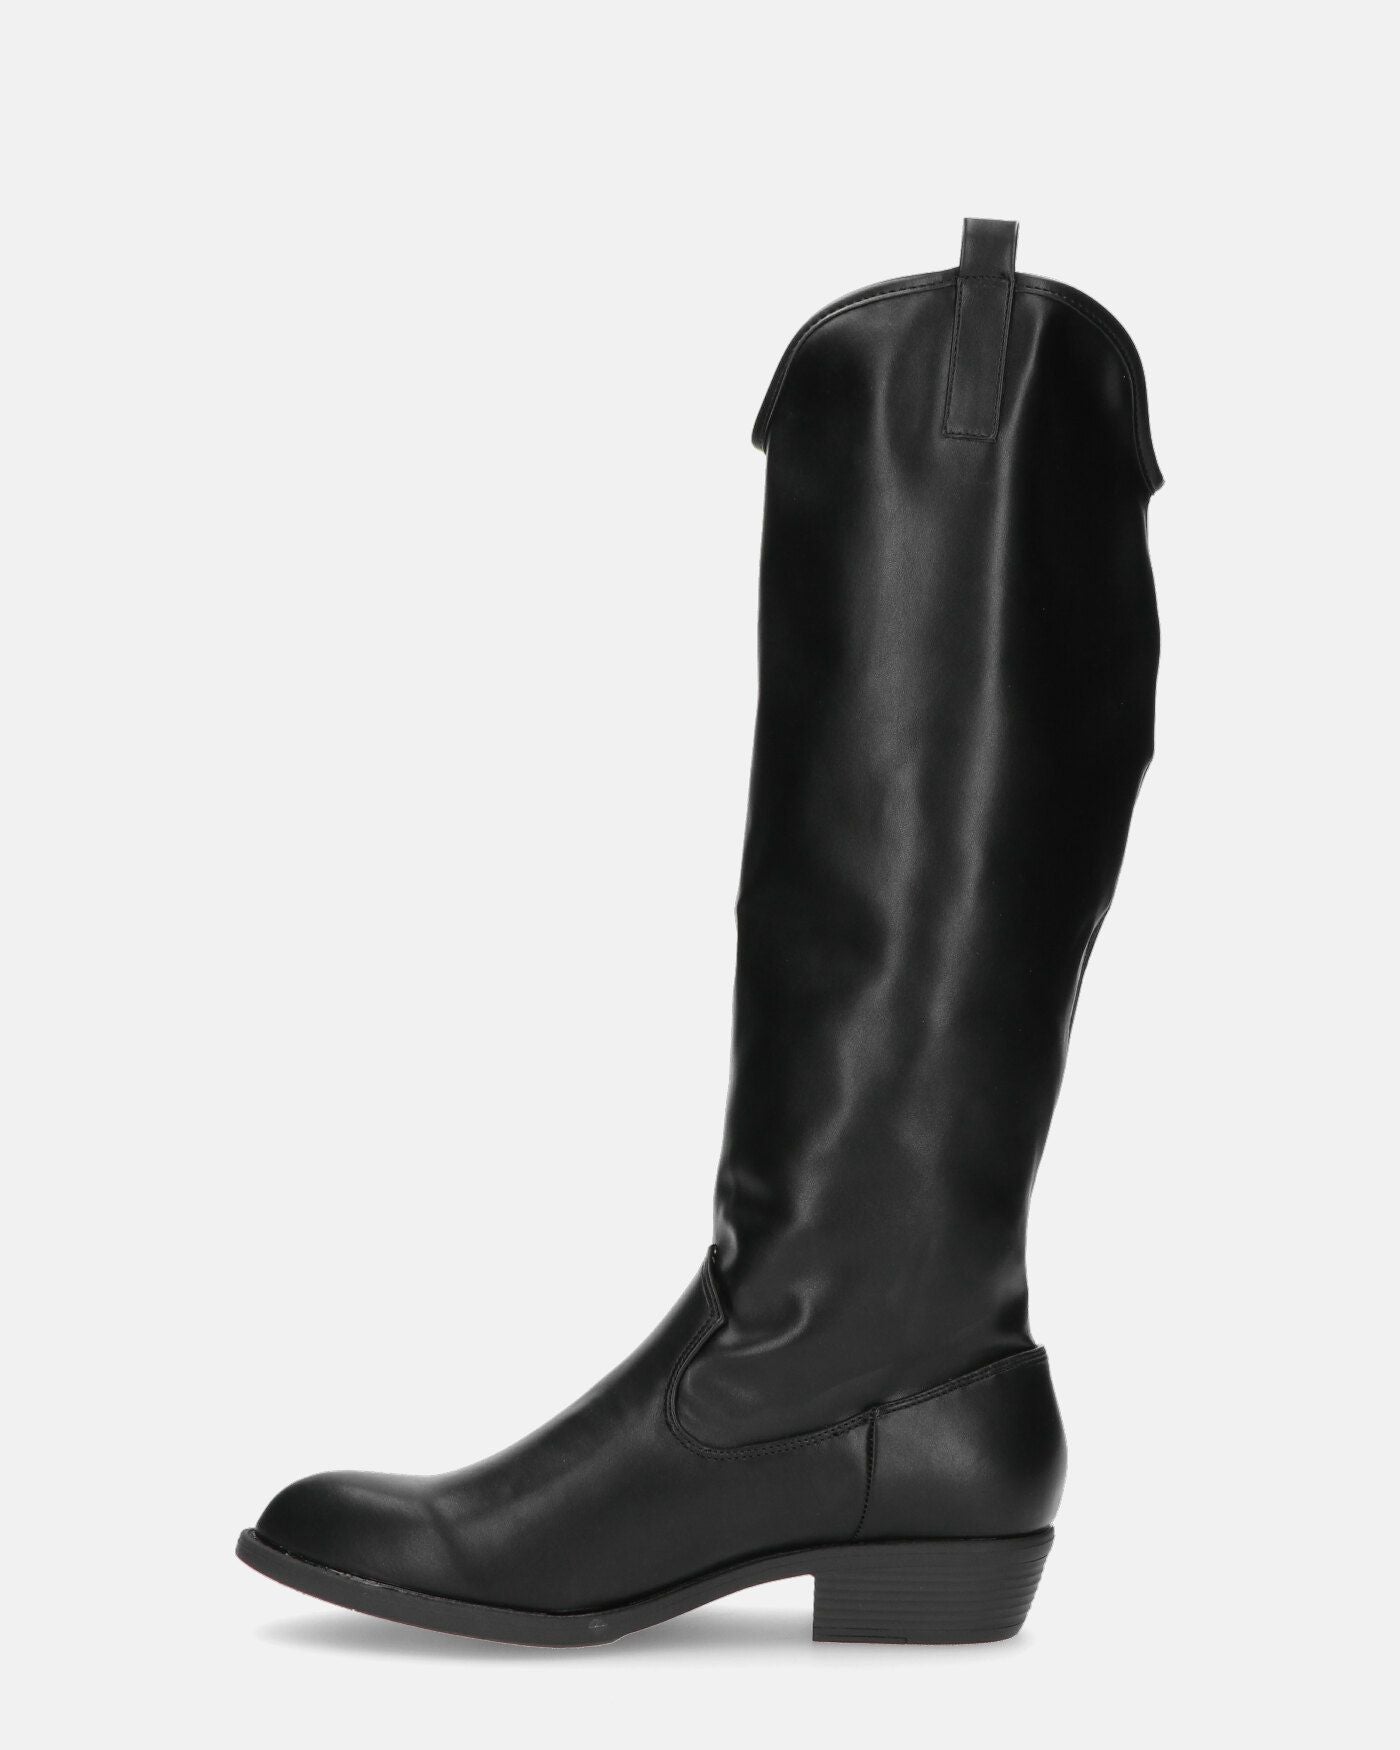 ANGELINA - black camperos boots